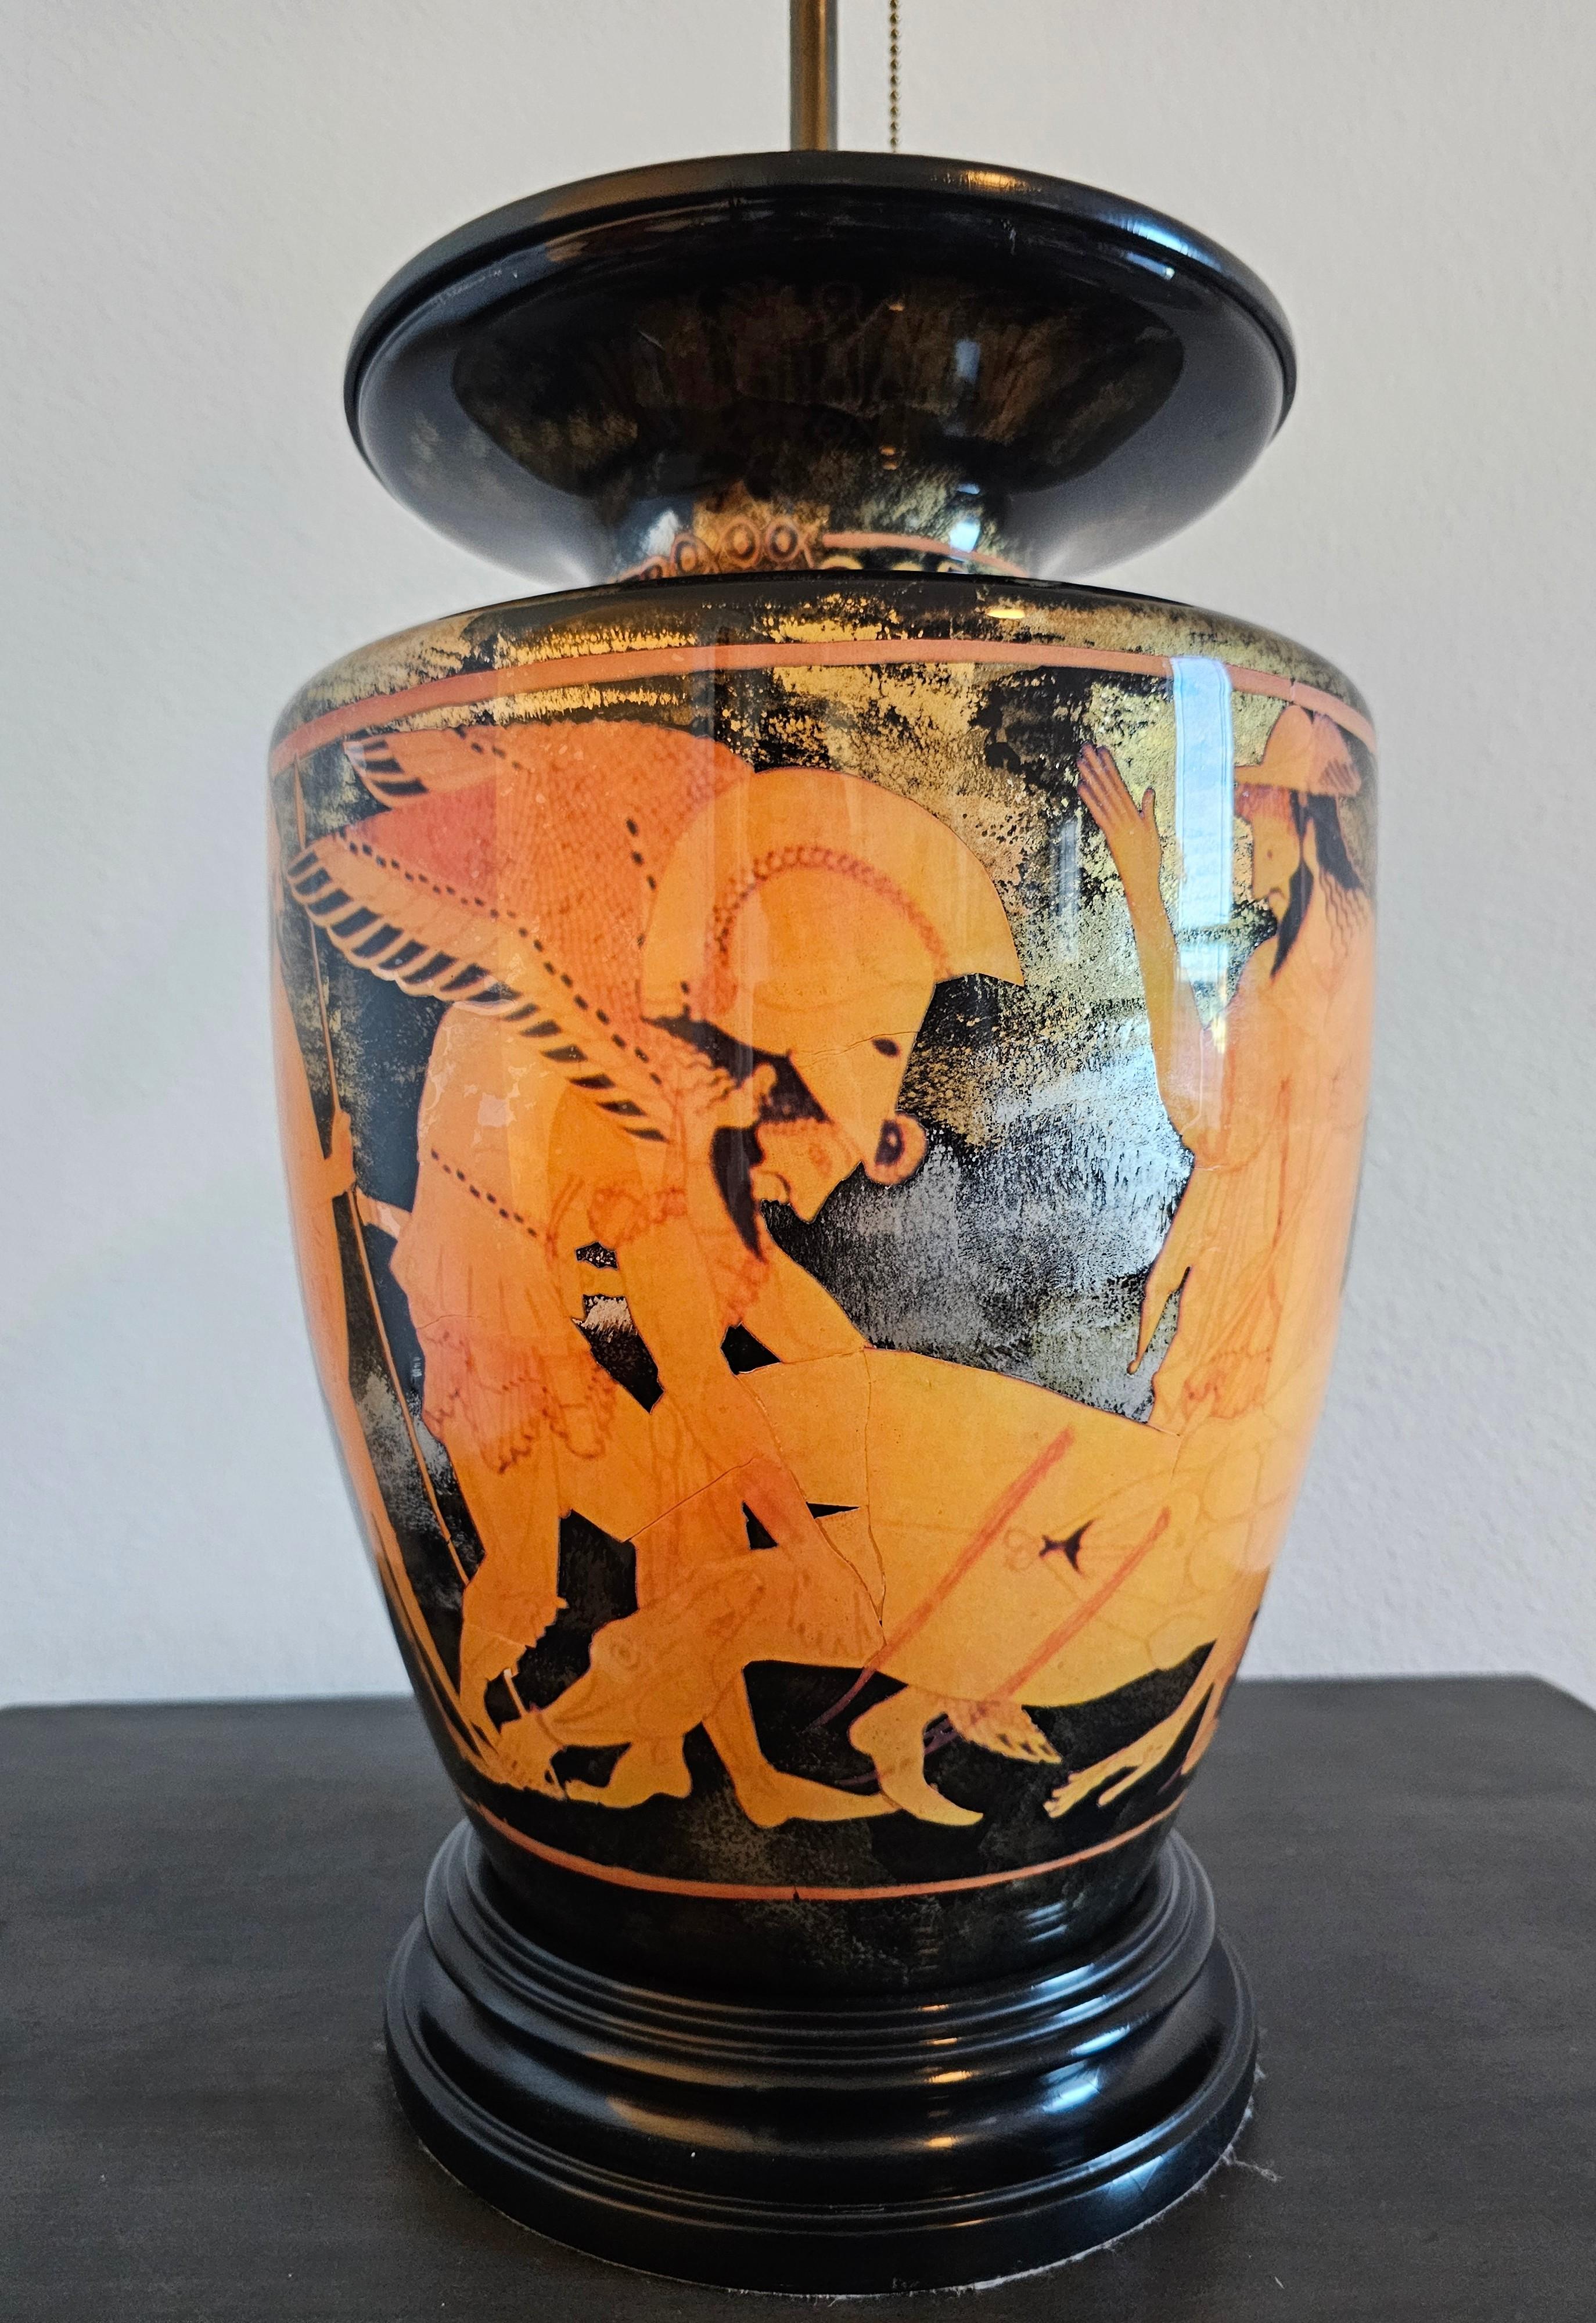 A visually striking large reverse painted neoclassical vasiform table lamp. After the antique by Euphronios (c.535-470 BC), black lacquered ancient Greek red-figure (orange) pottery style vase with splashes of gold and silver gilt, depicting